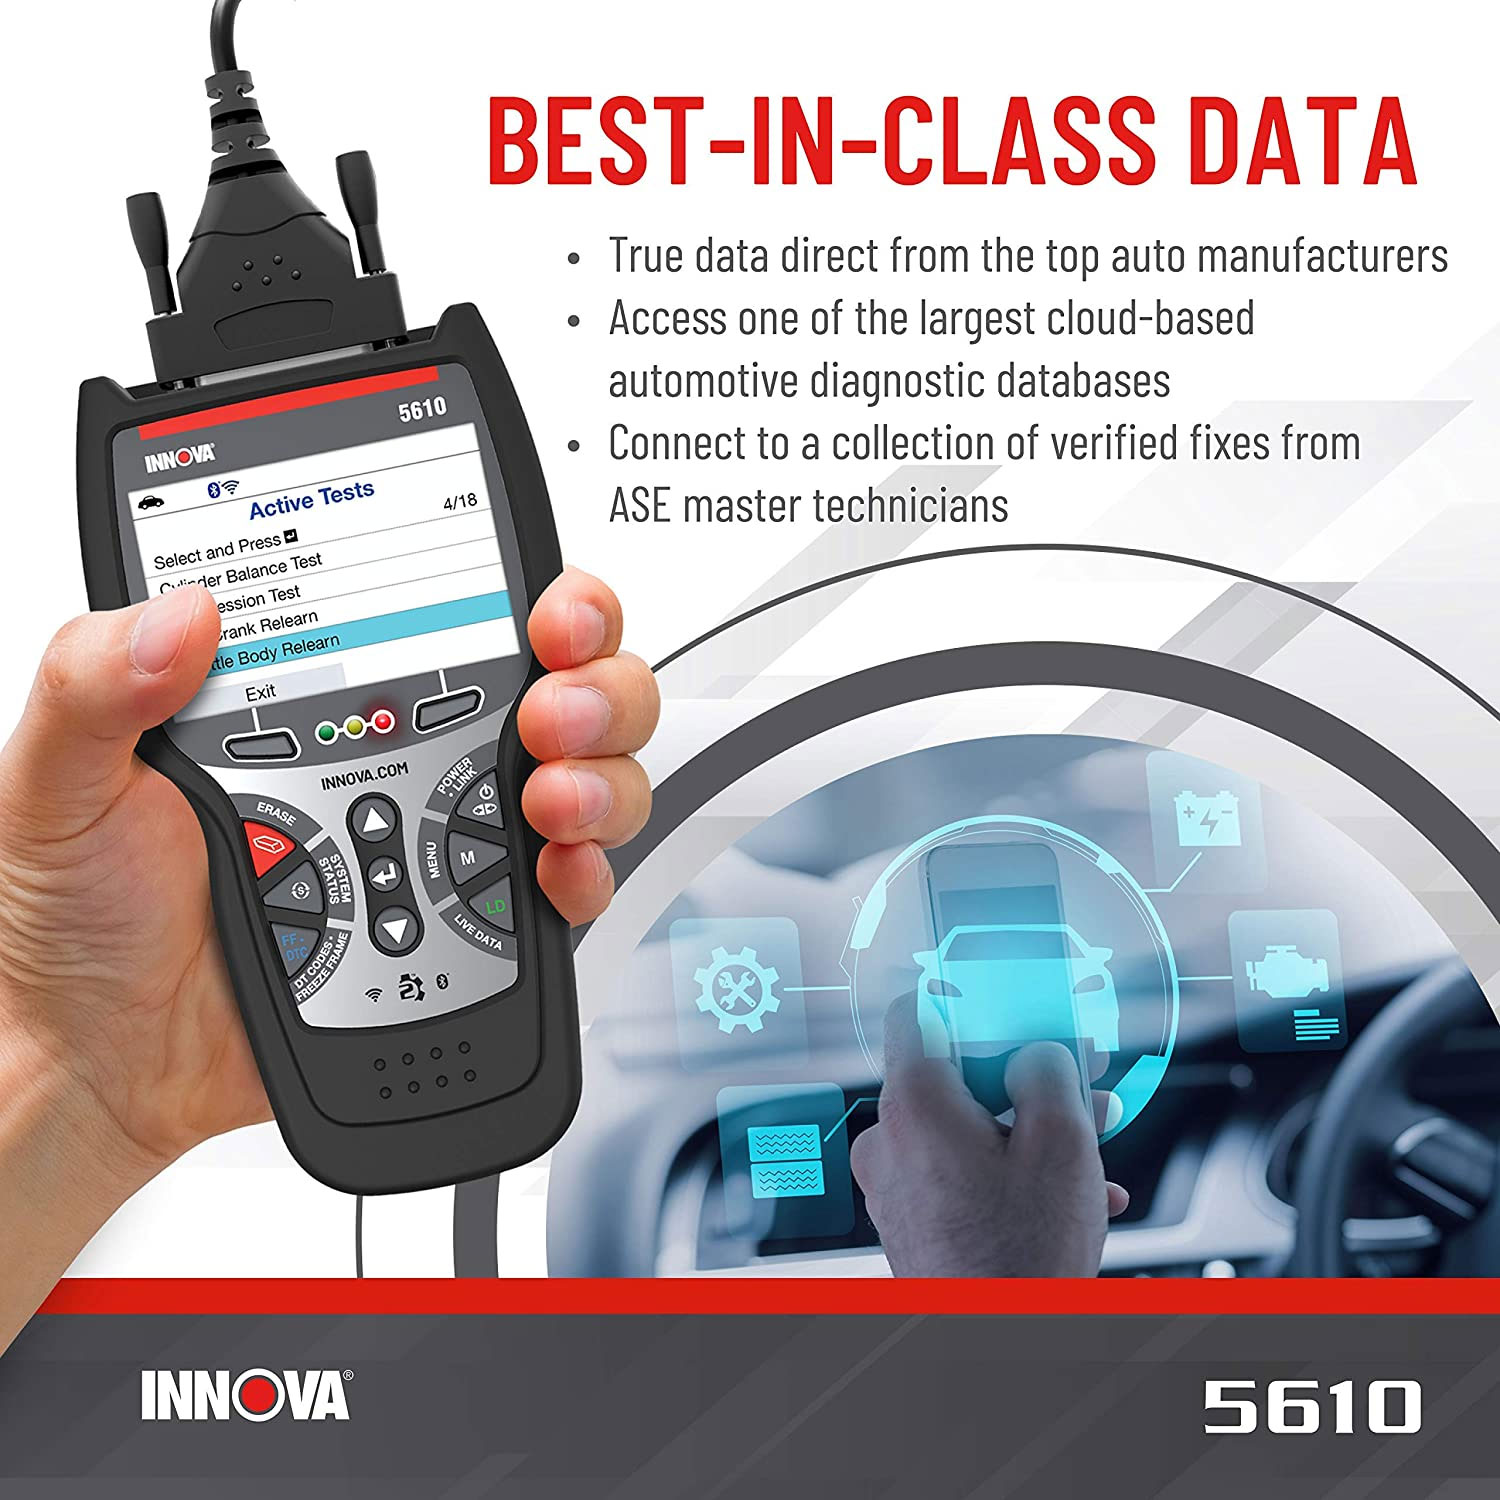 INNOVA 5610 CarScan Pro Bluetooth Code Reader Vehicle Diagnostic Scanner Tool - image 4 of 8